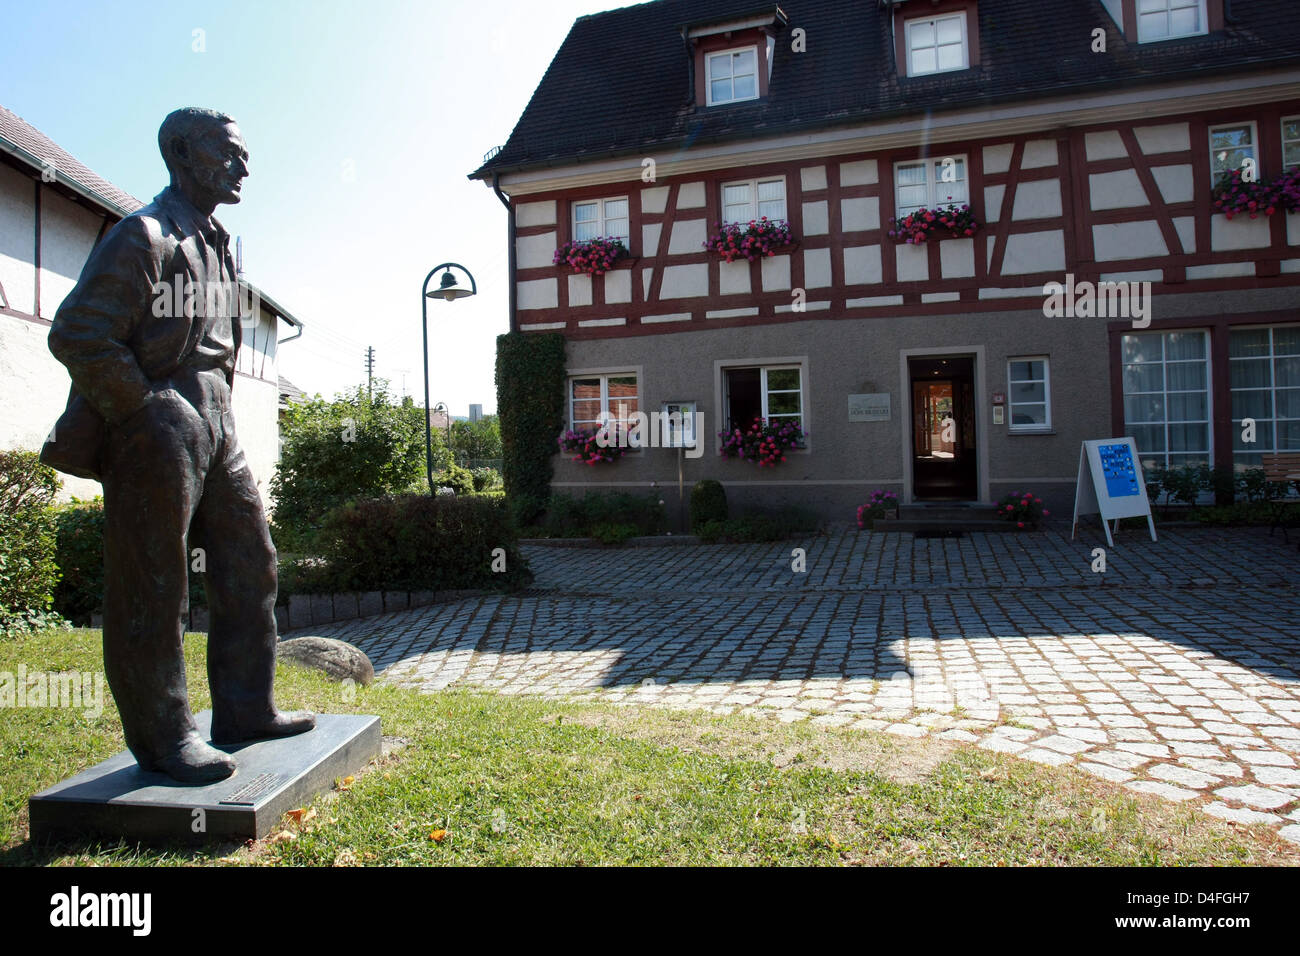 The bronze statue of German author Hermann Hesse pictured at the Hermann-Hesse-Moeri-Museum in Gaienhofen, Germany, 09 July 2008. At the museum, the Hesse family's first residence was located from 1904 to 1907. Photo: Patrick Seeger Stock Photo